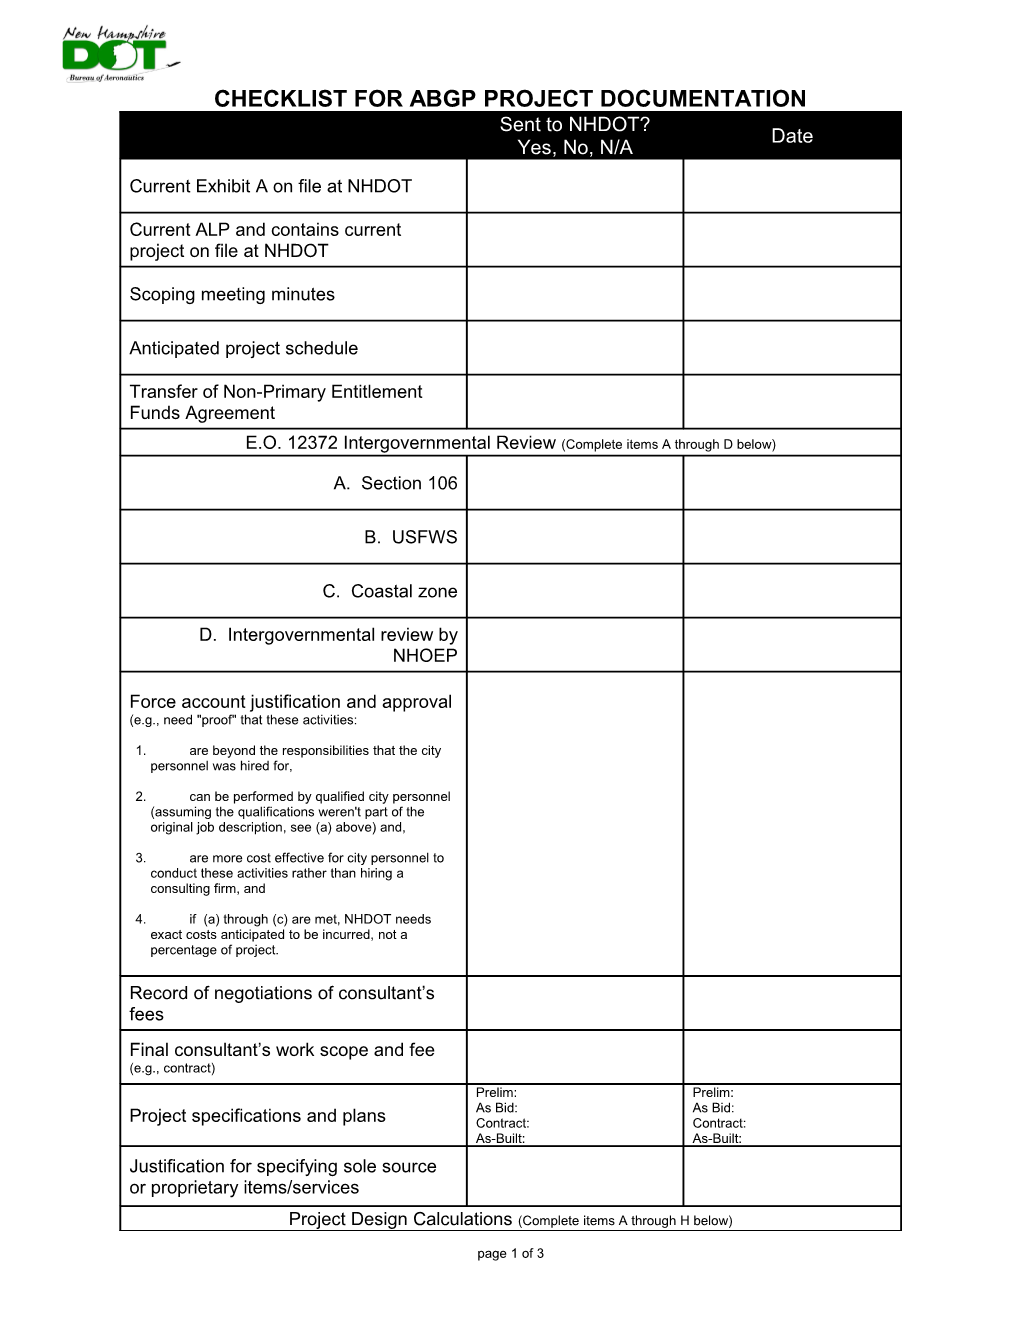 Checklist for Grant Offer Readiness